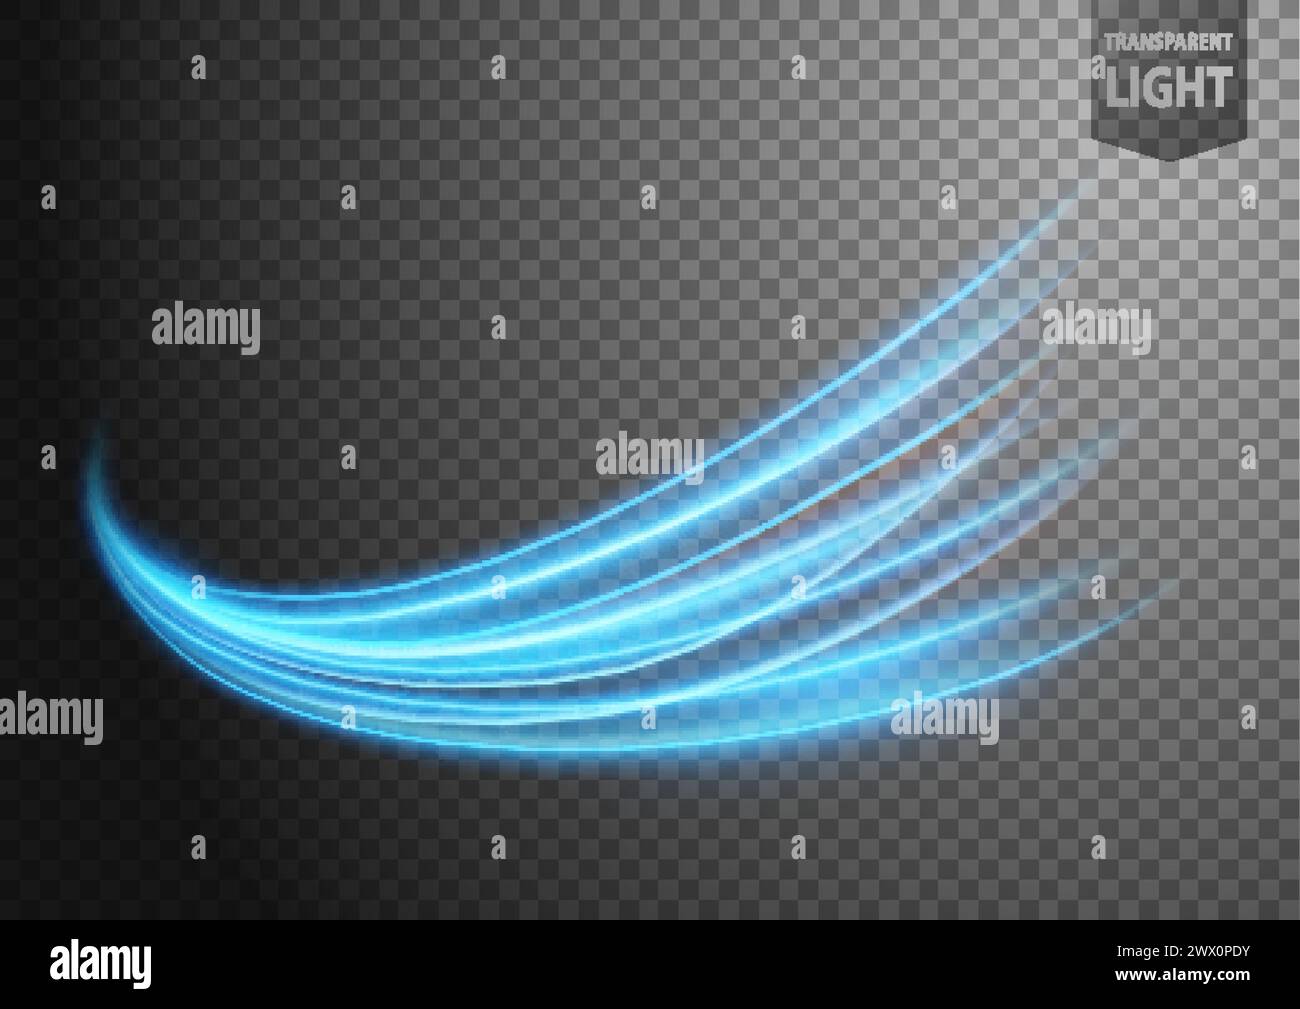 Abstract Blue Wavy Line of Light with A Transparent Background, Isolated and Easy to Edit, Vector Illustration Stock Vector